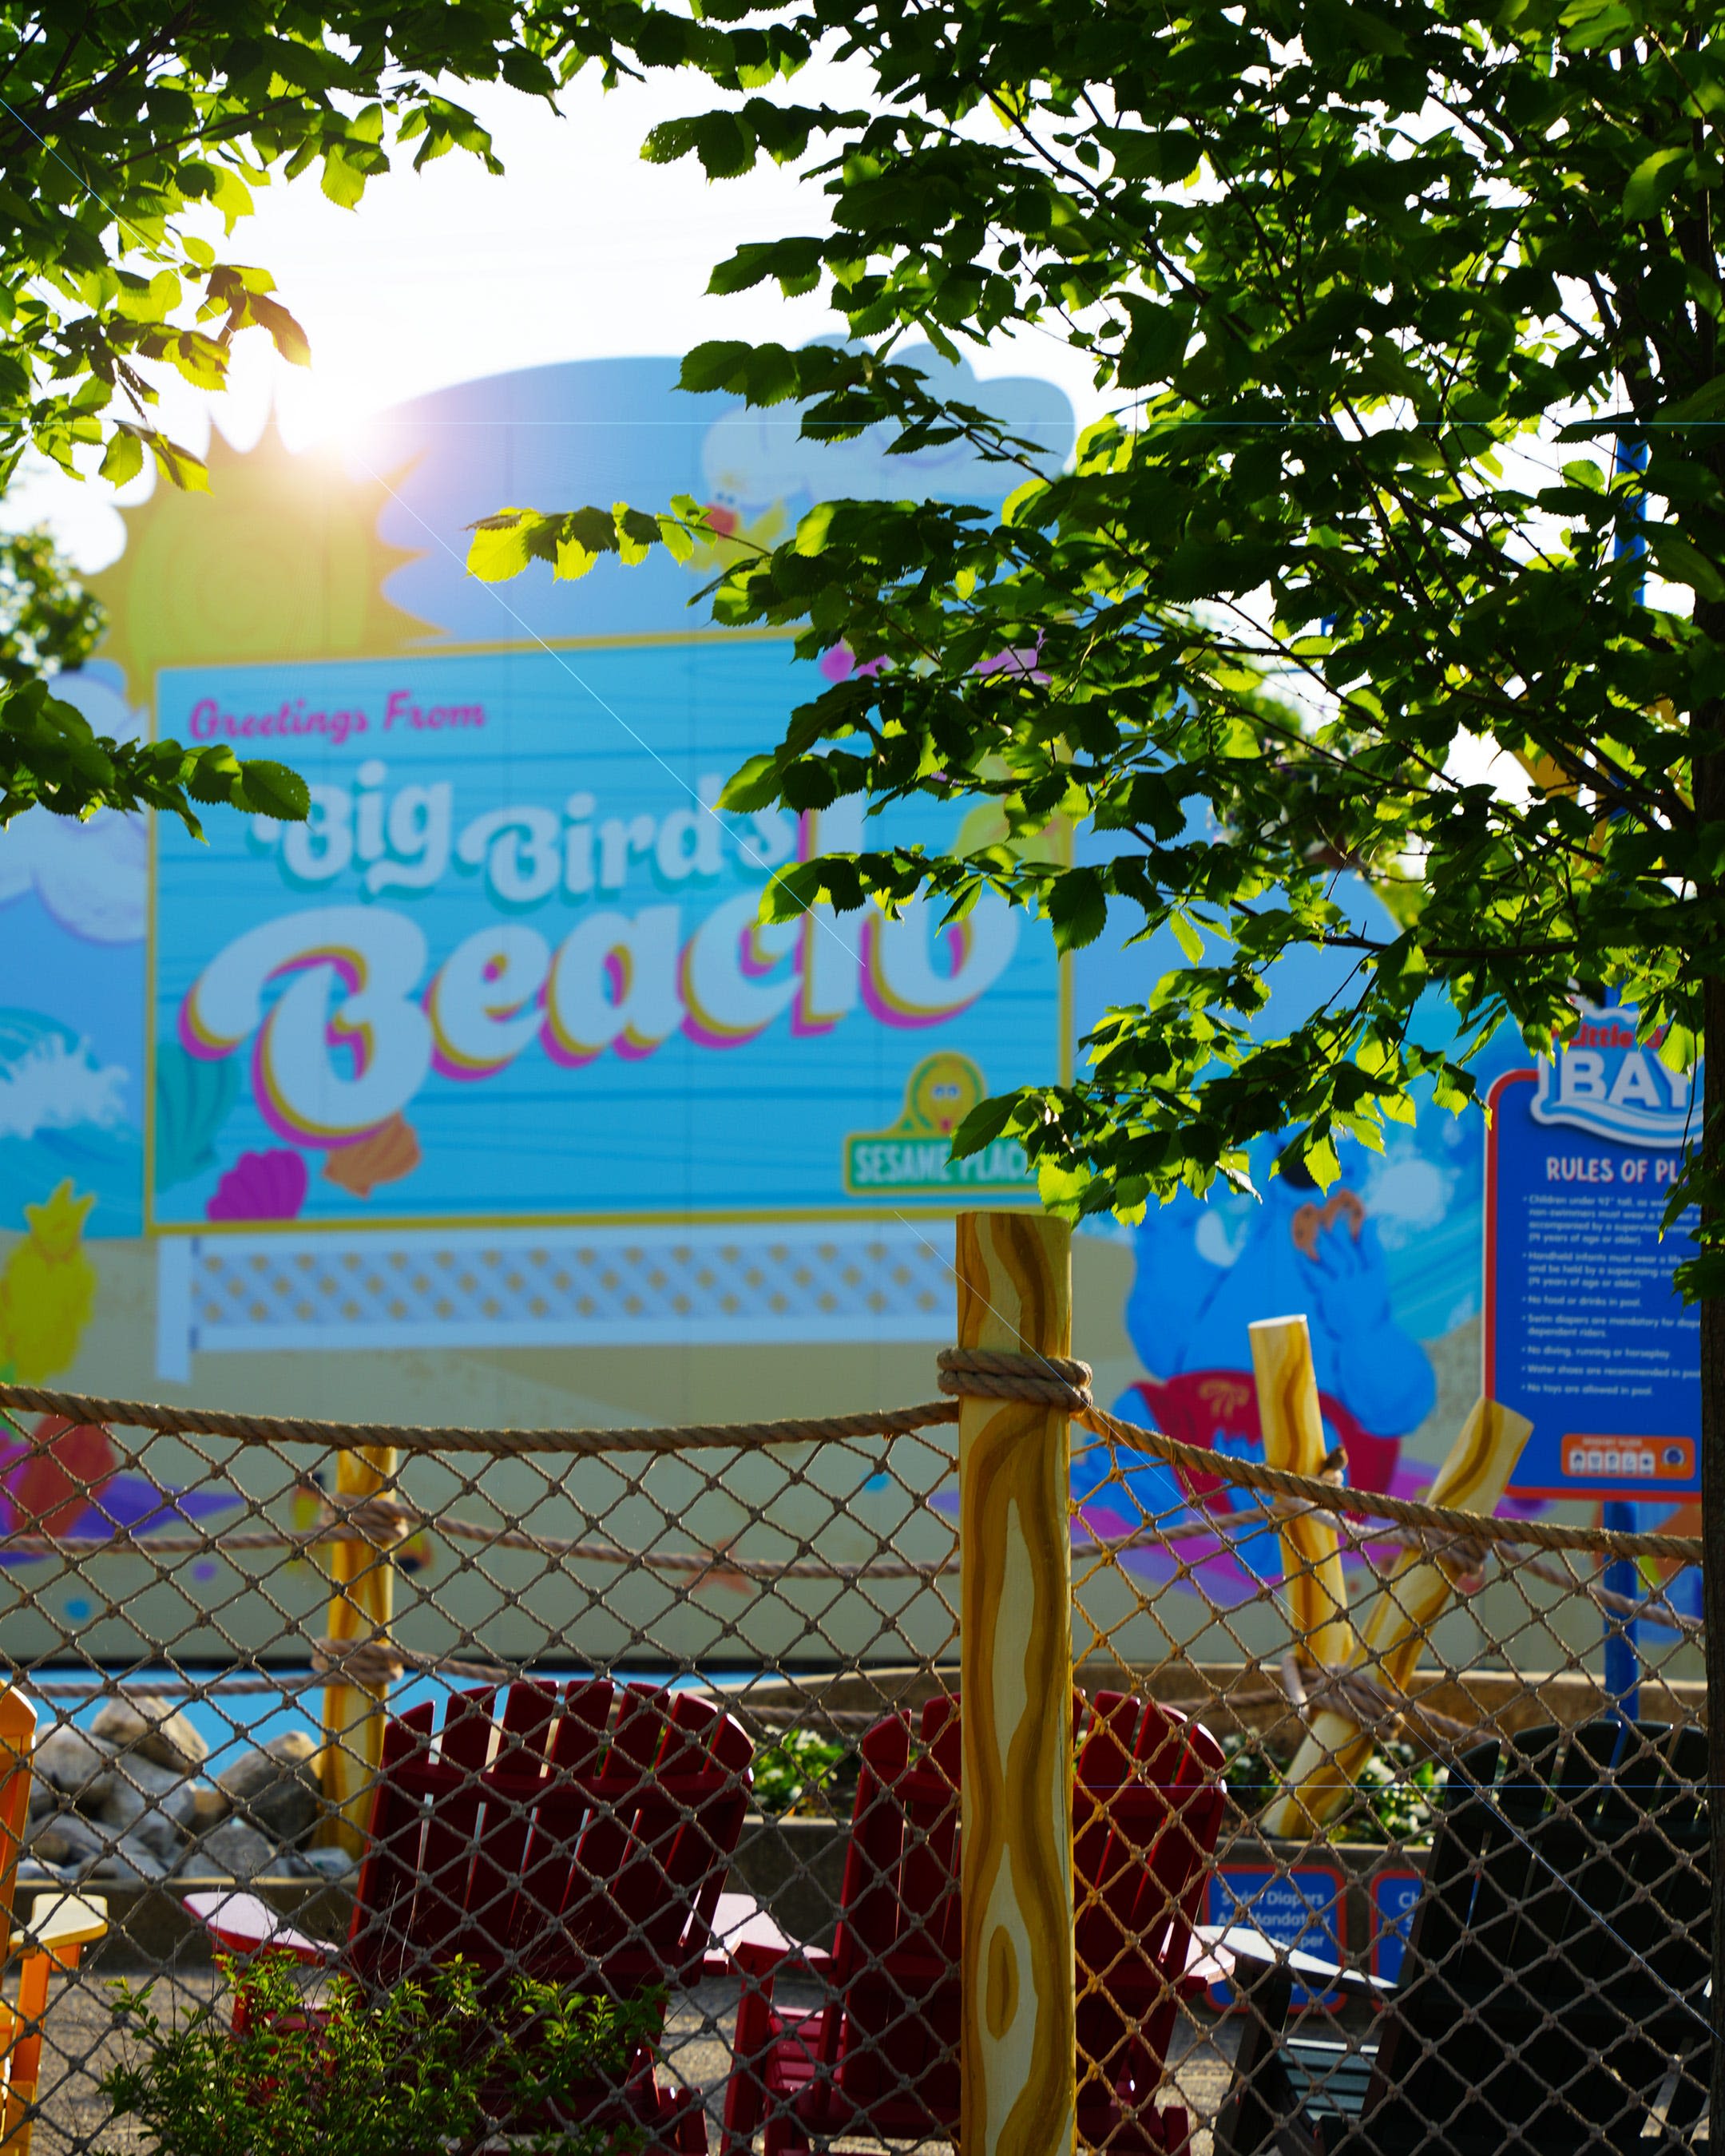 Sesame Place extends hours for summer. Here's the new lineup